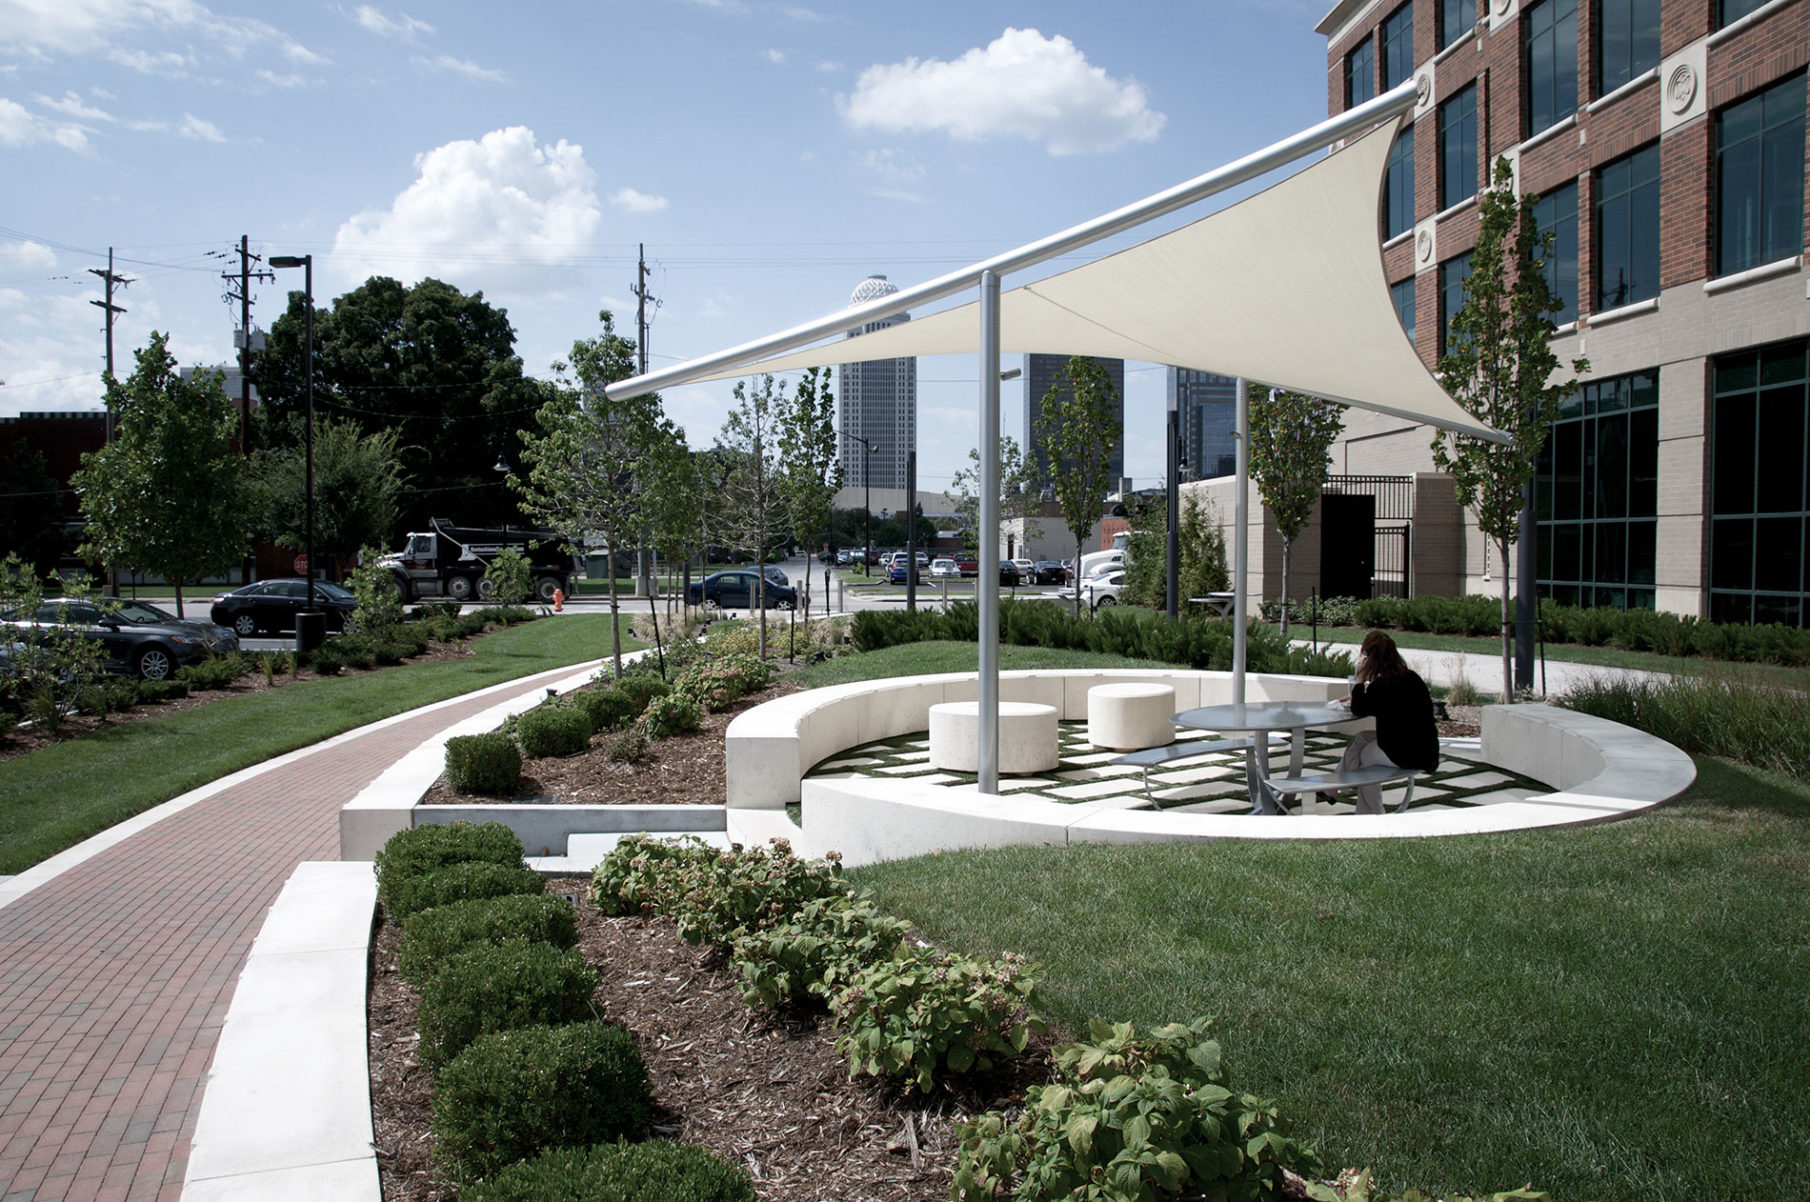 JD Nichols Plaza combines Custom and Commercial Pavers for a nice rest stop on Louisville University campus